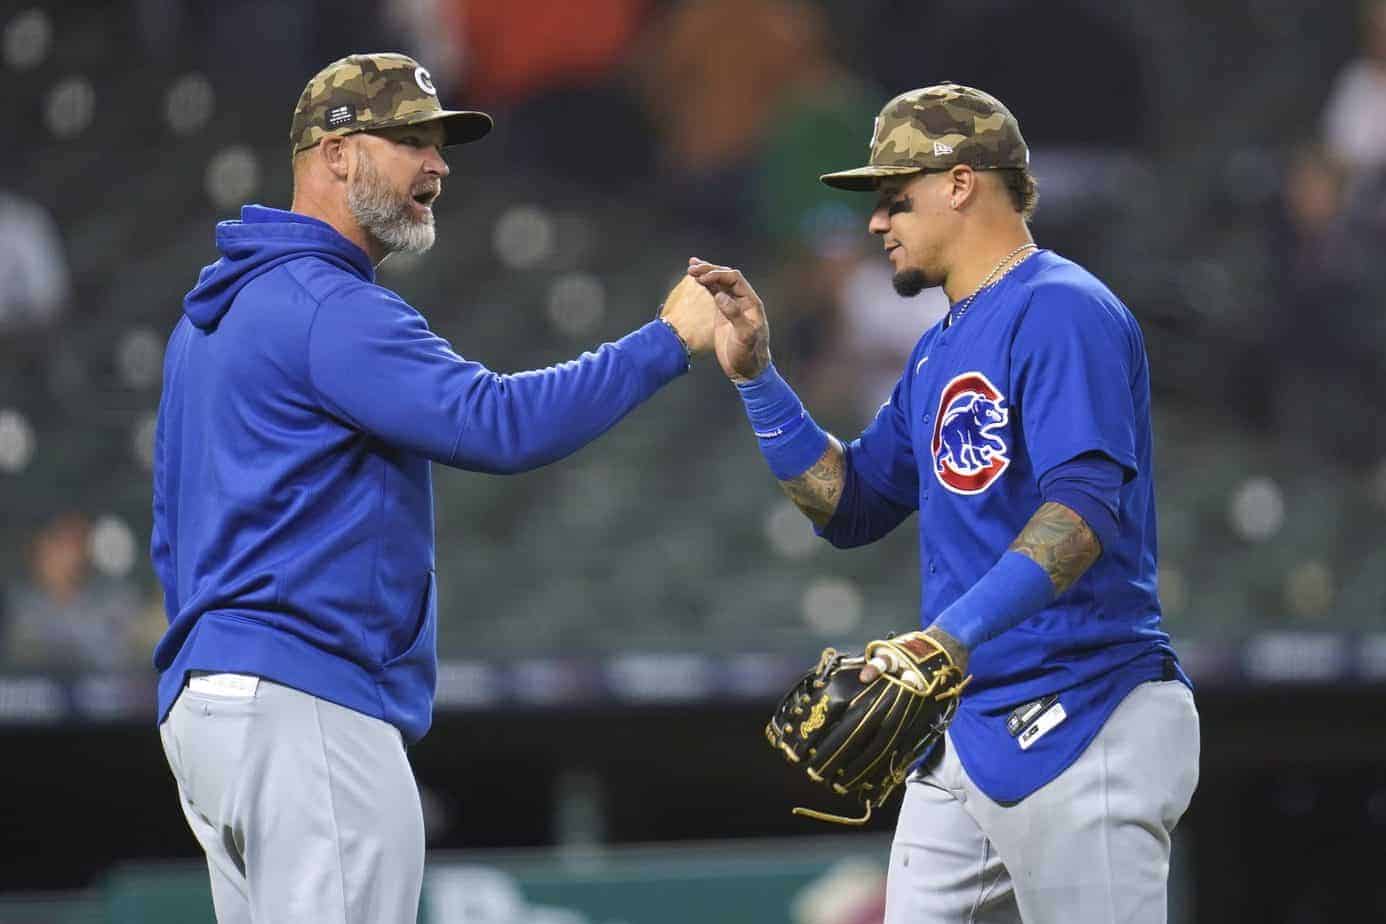 Chicago Cubs manager David Ross shared his feelings on the decision to bench Javier Baez after the shortstop forgot how many outs there were